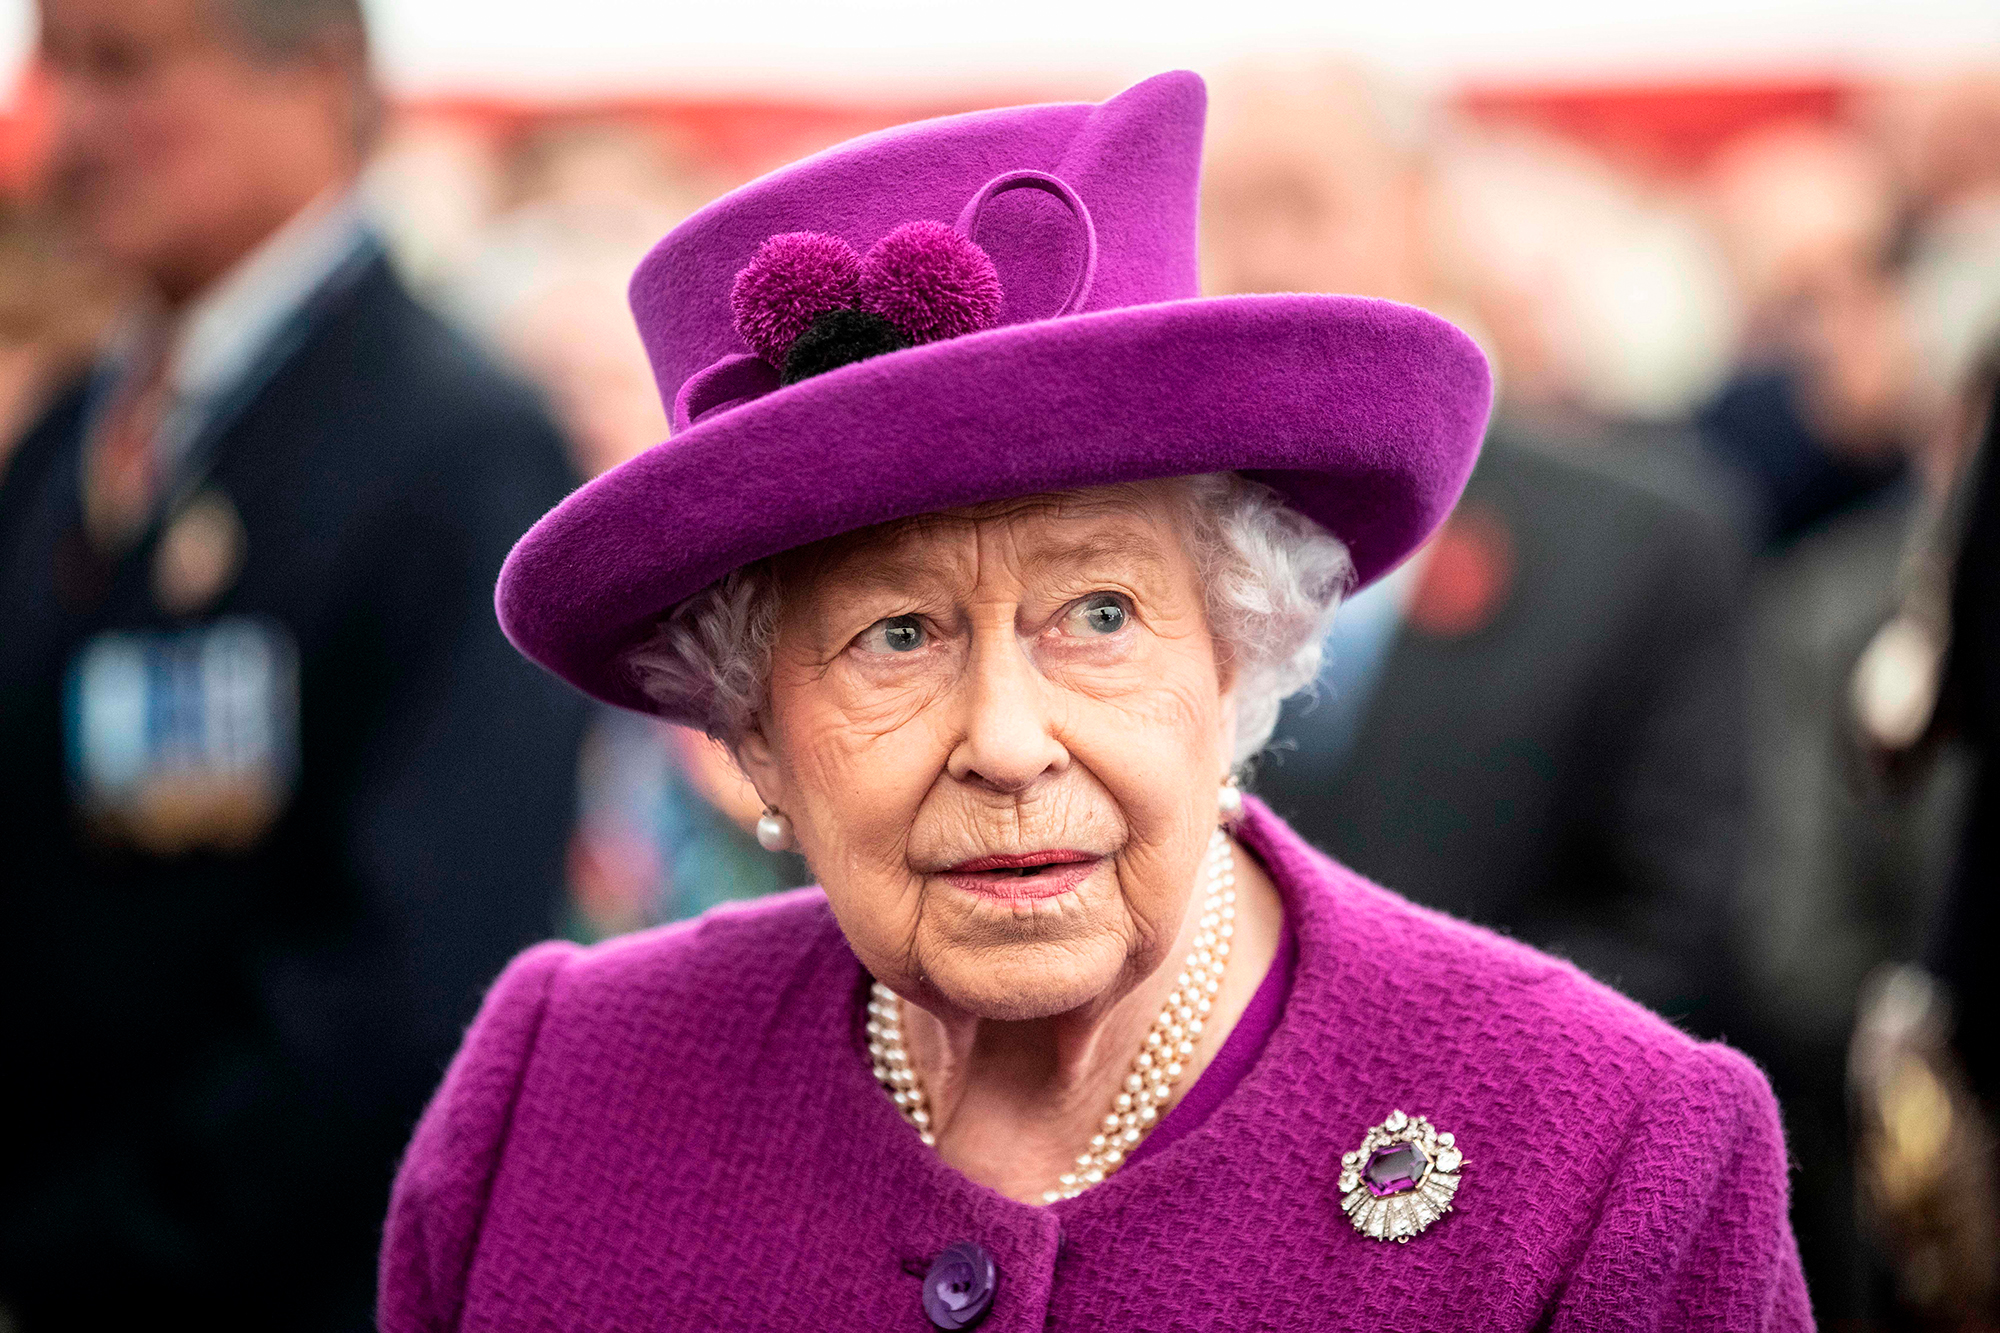 why did queen elizabeth of england decide on the family surname windsor mountbaden